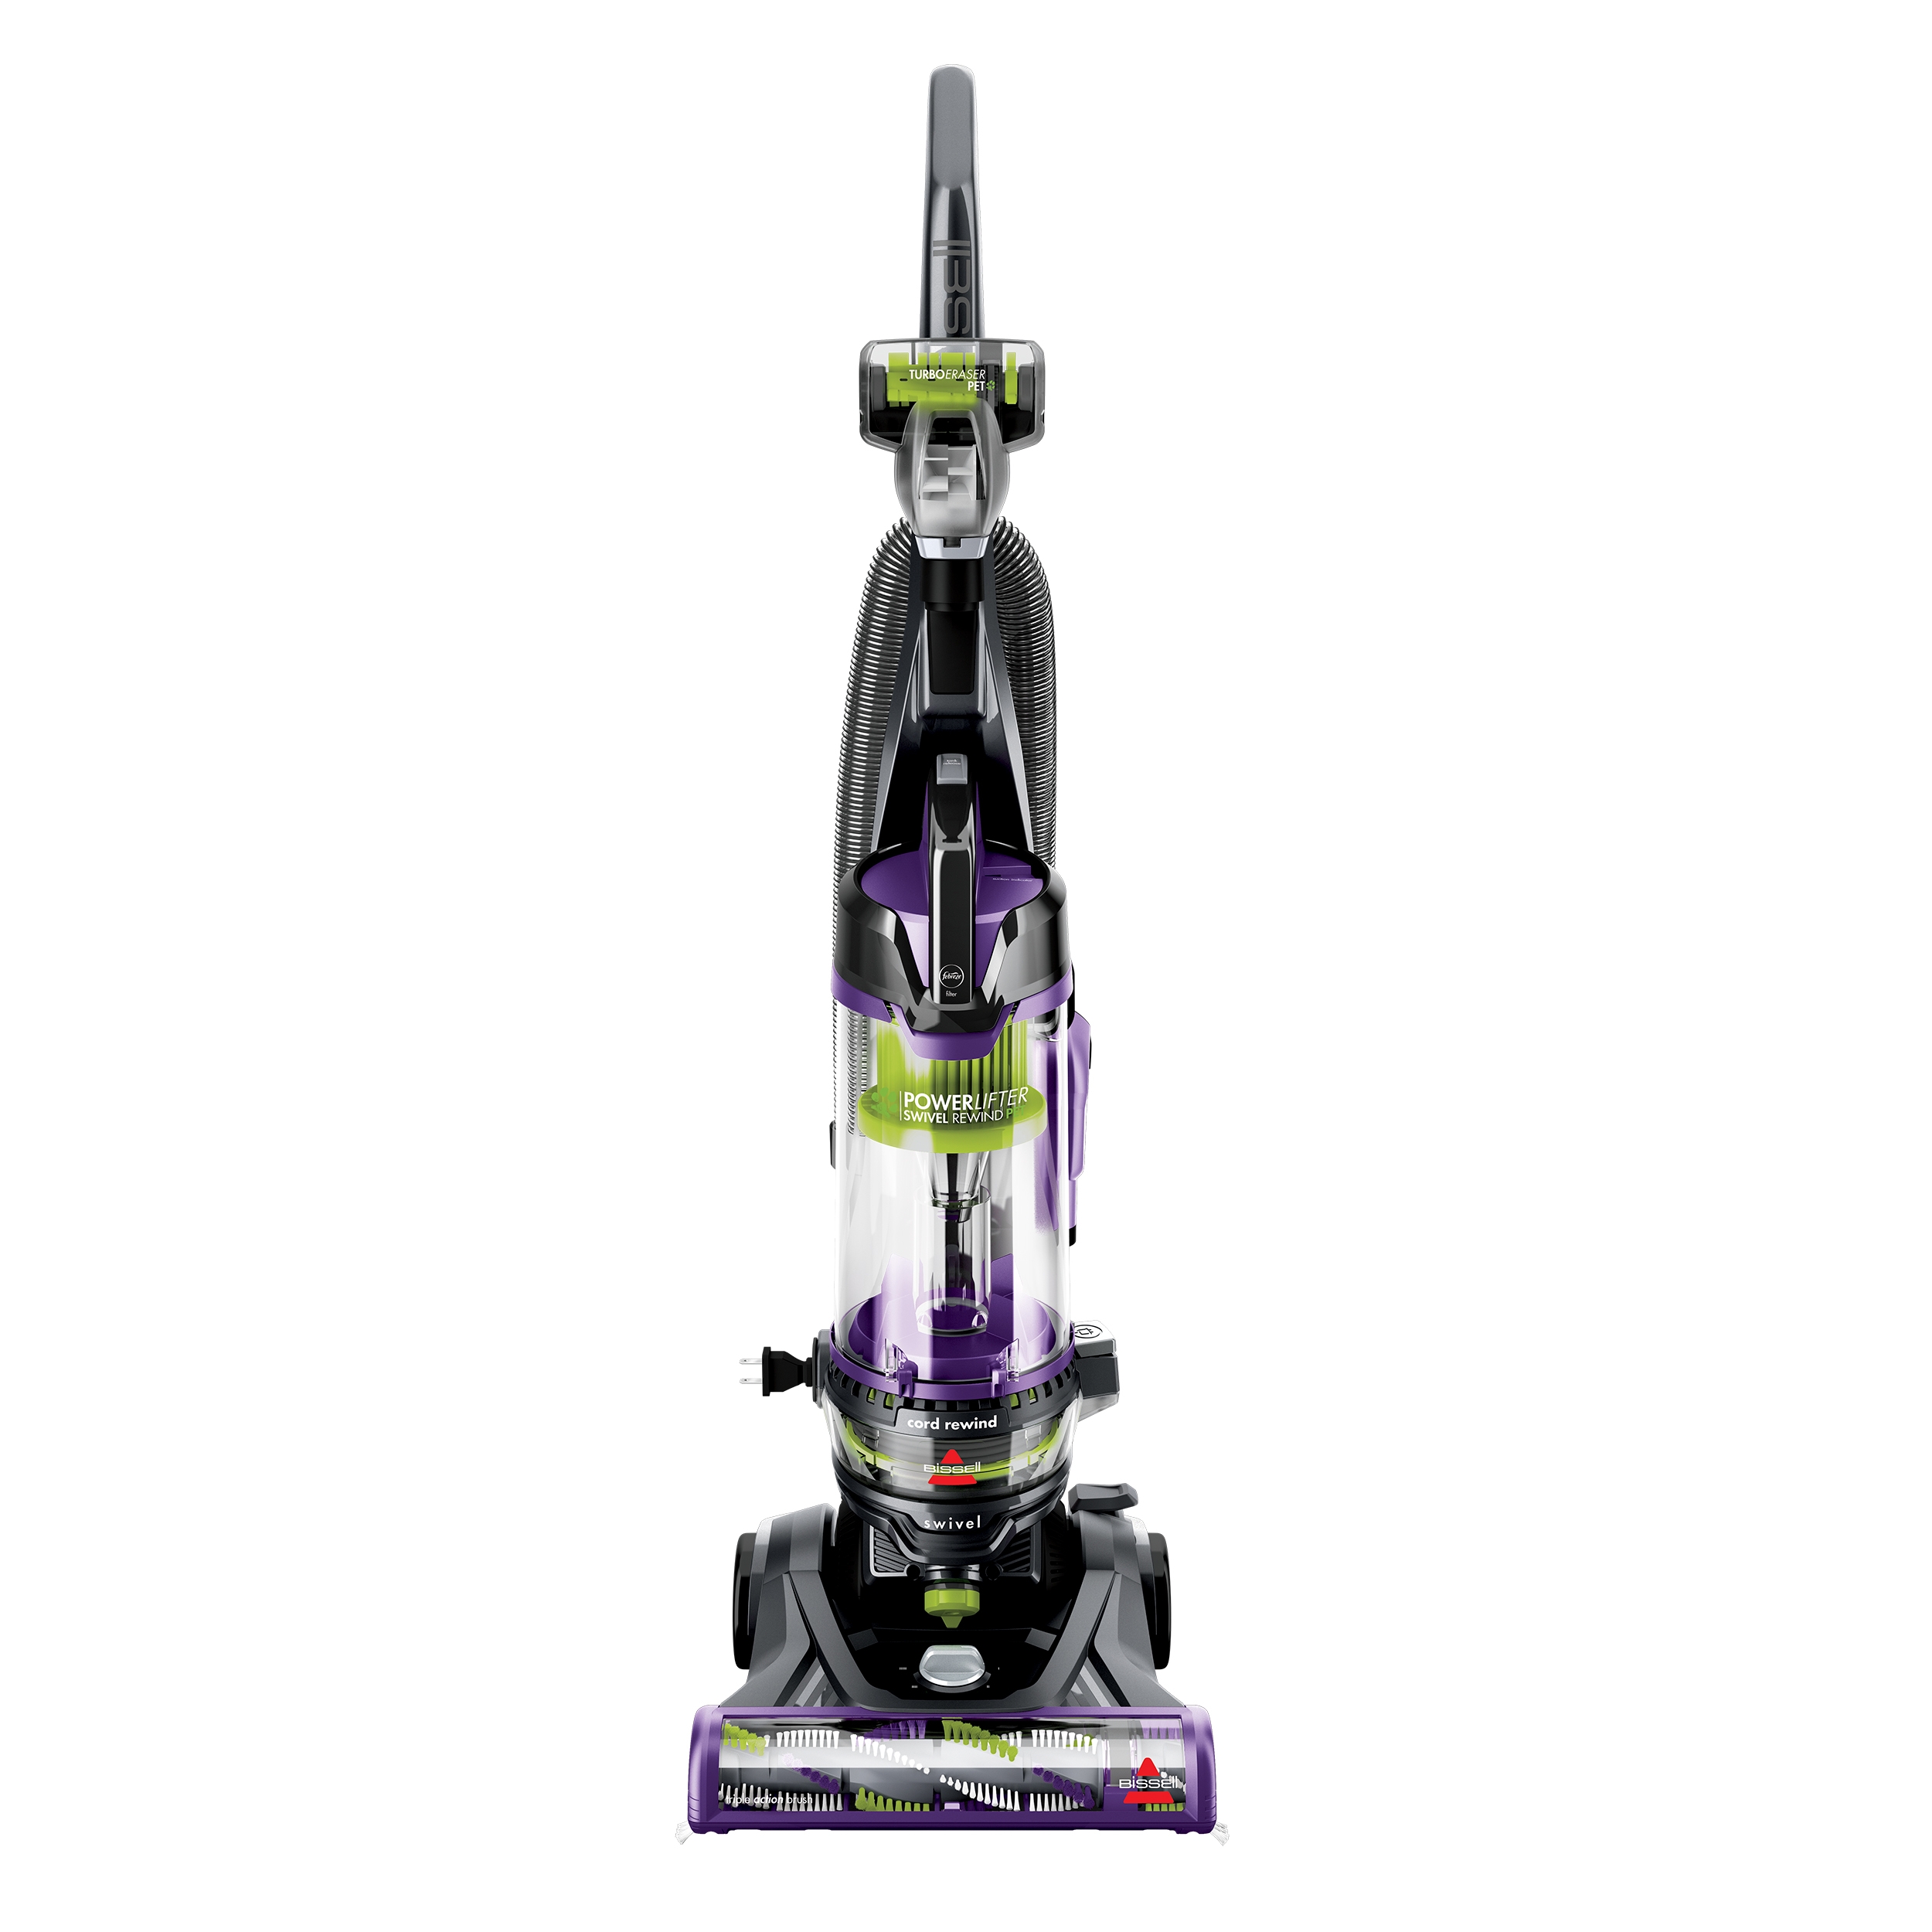 BISSELL Power Lifter Pet Rewind with Swivel Bagless Upright Vacuum, 2259 - image 2 of 9